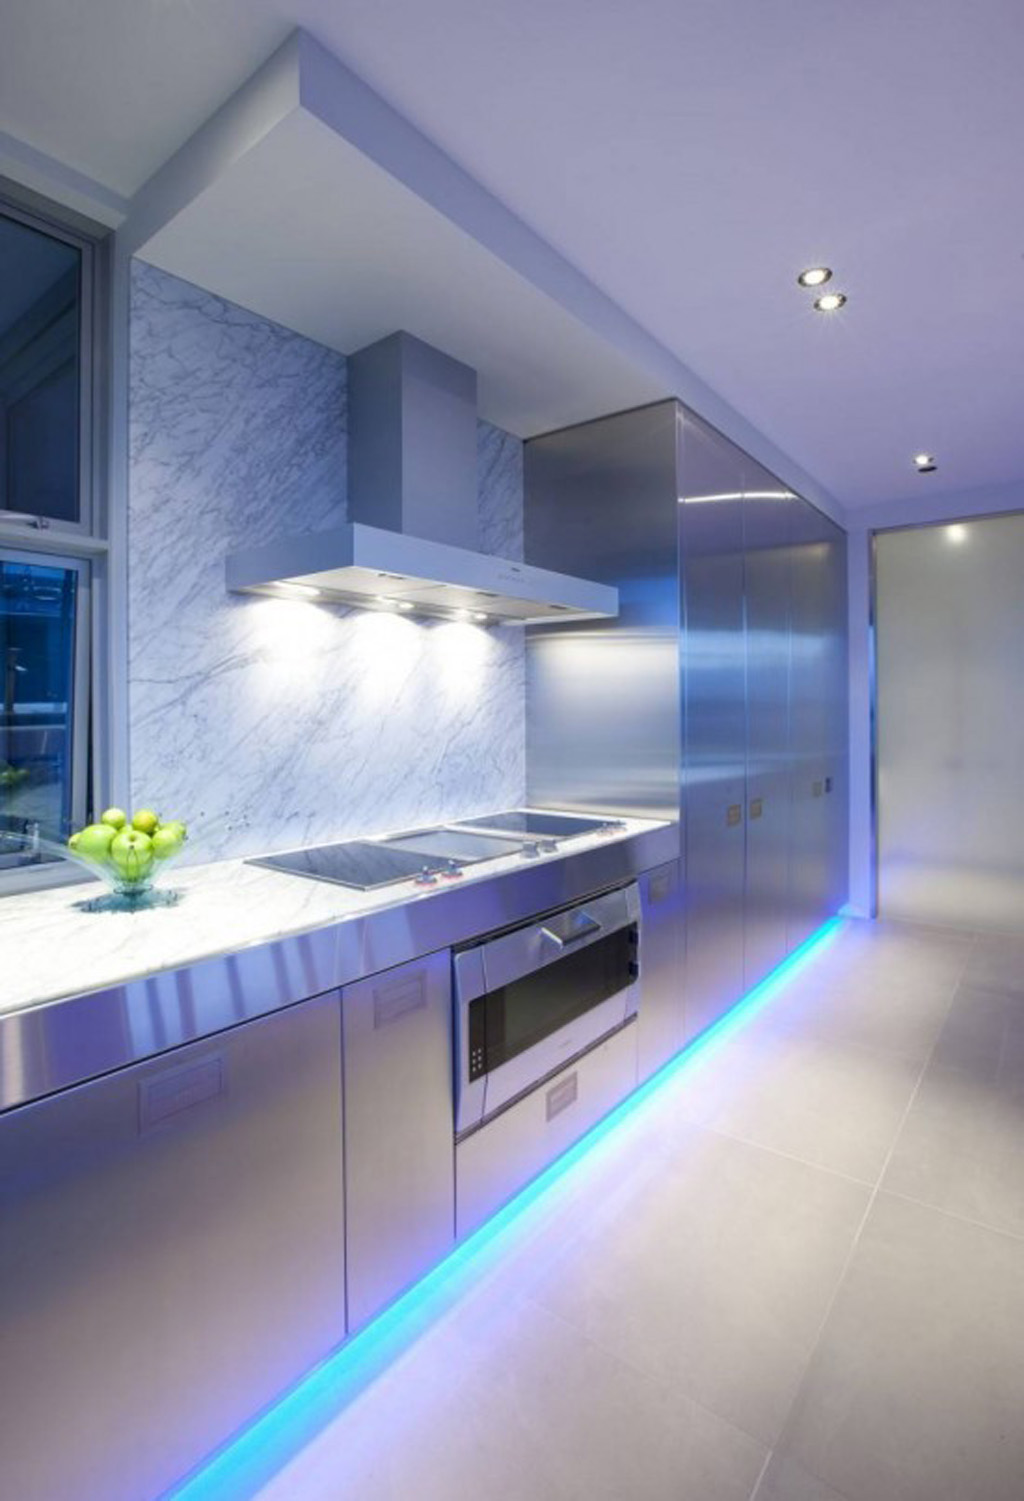 A modern kitchen with blue lighting and stainless steel appliances illuminating the space.